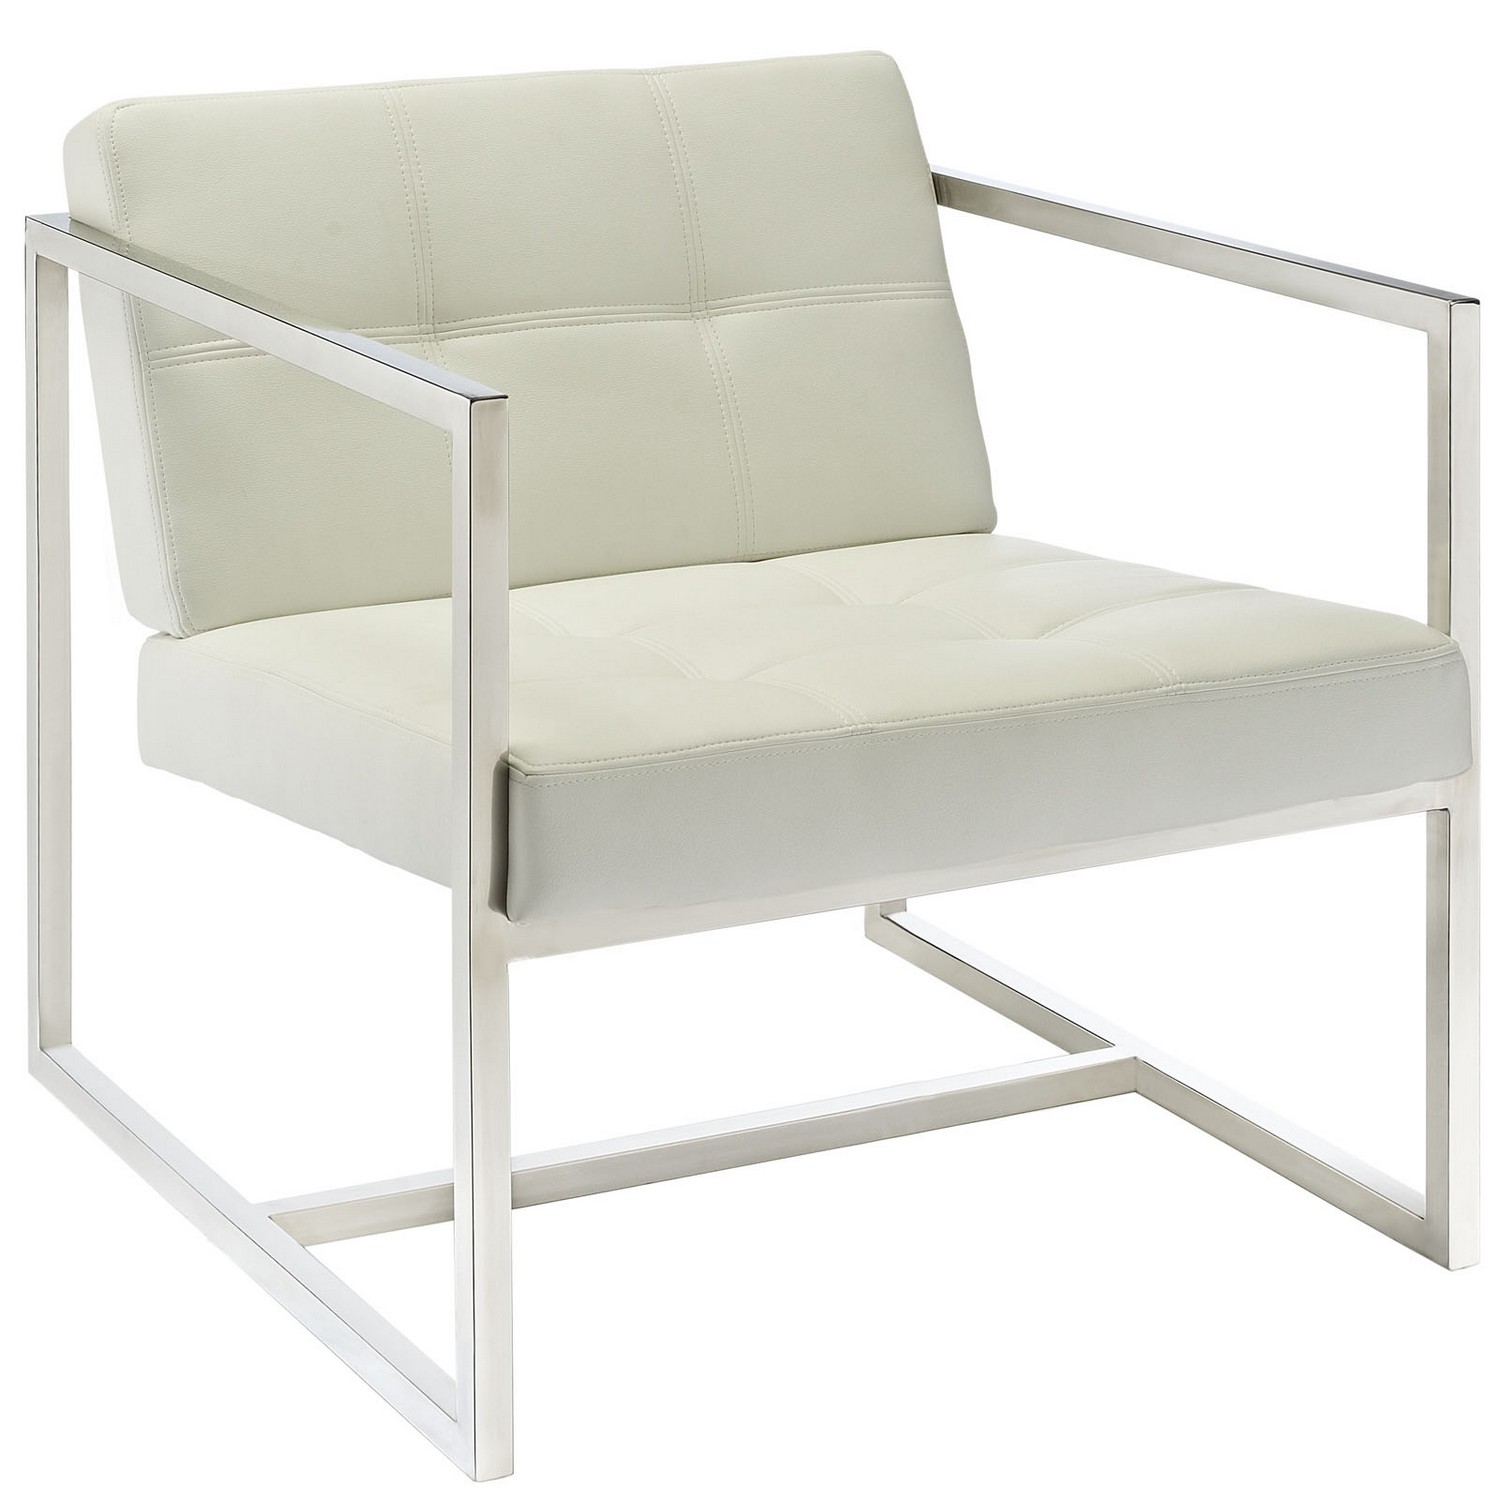 Modway Hover Lounge Chair - White